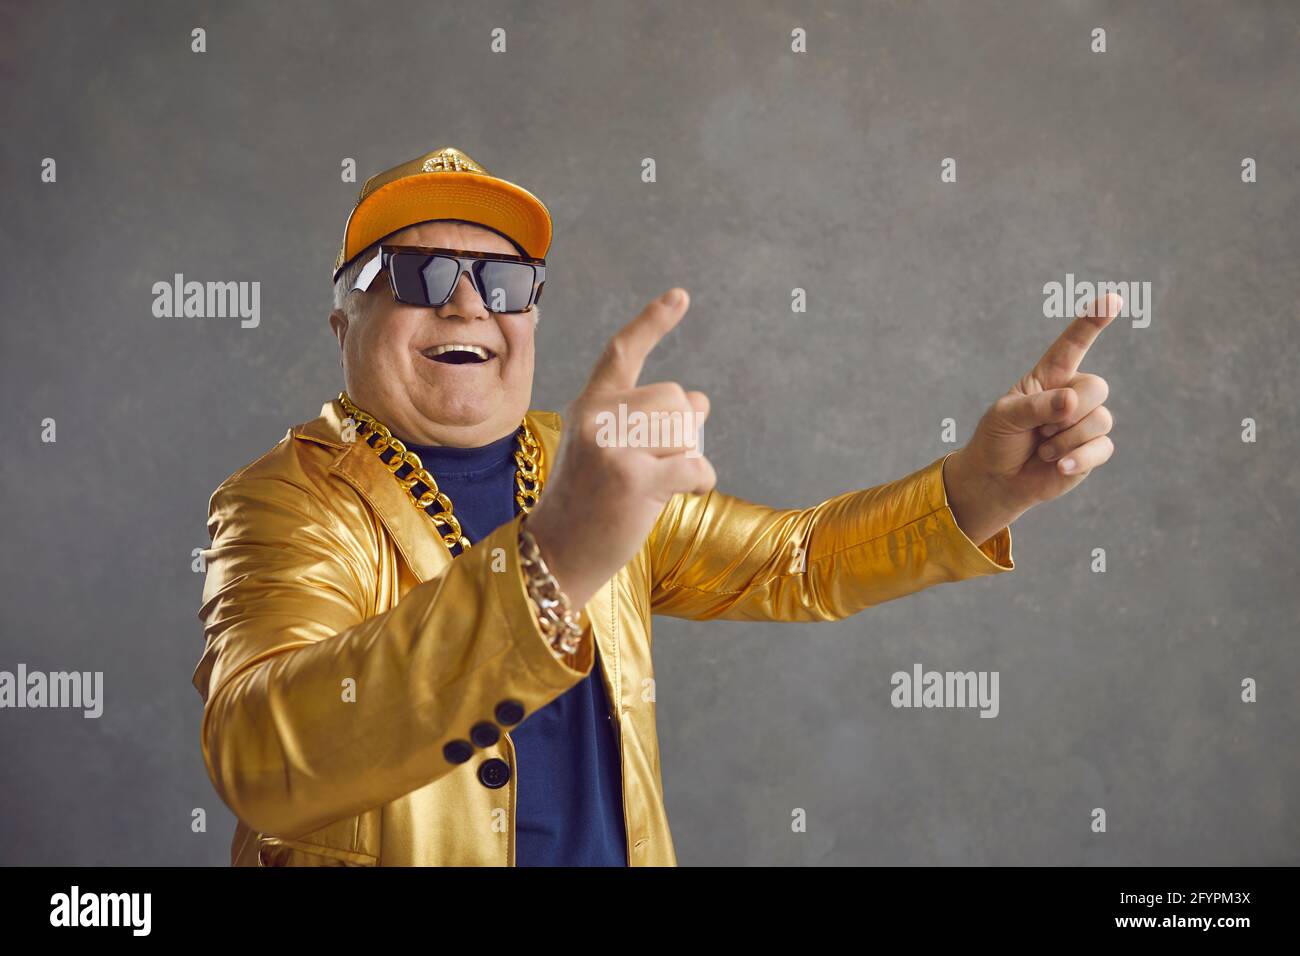 Funny senior man in golden jacket, baseball cap and chain necklace dancing  and having fun Stock Photo - Alamy